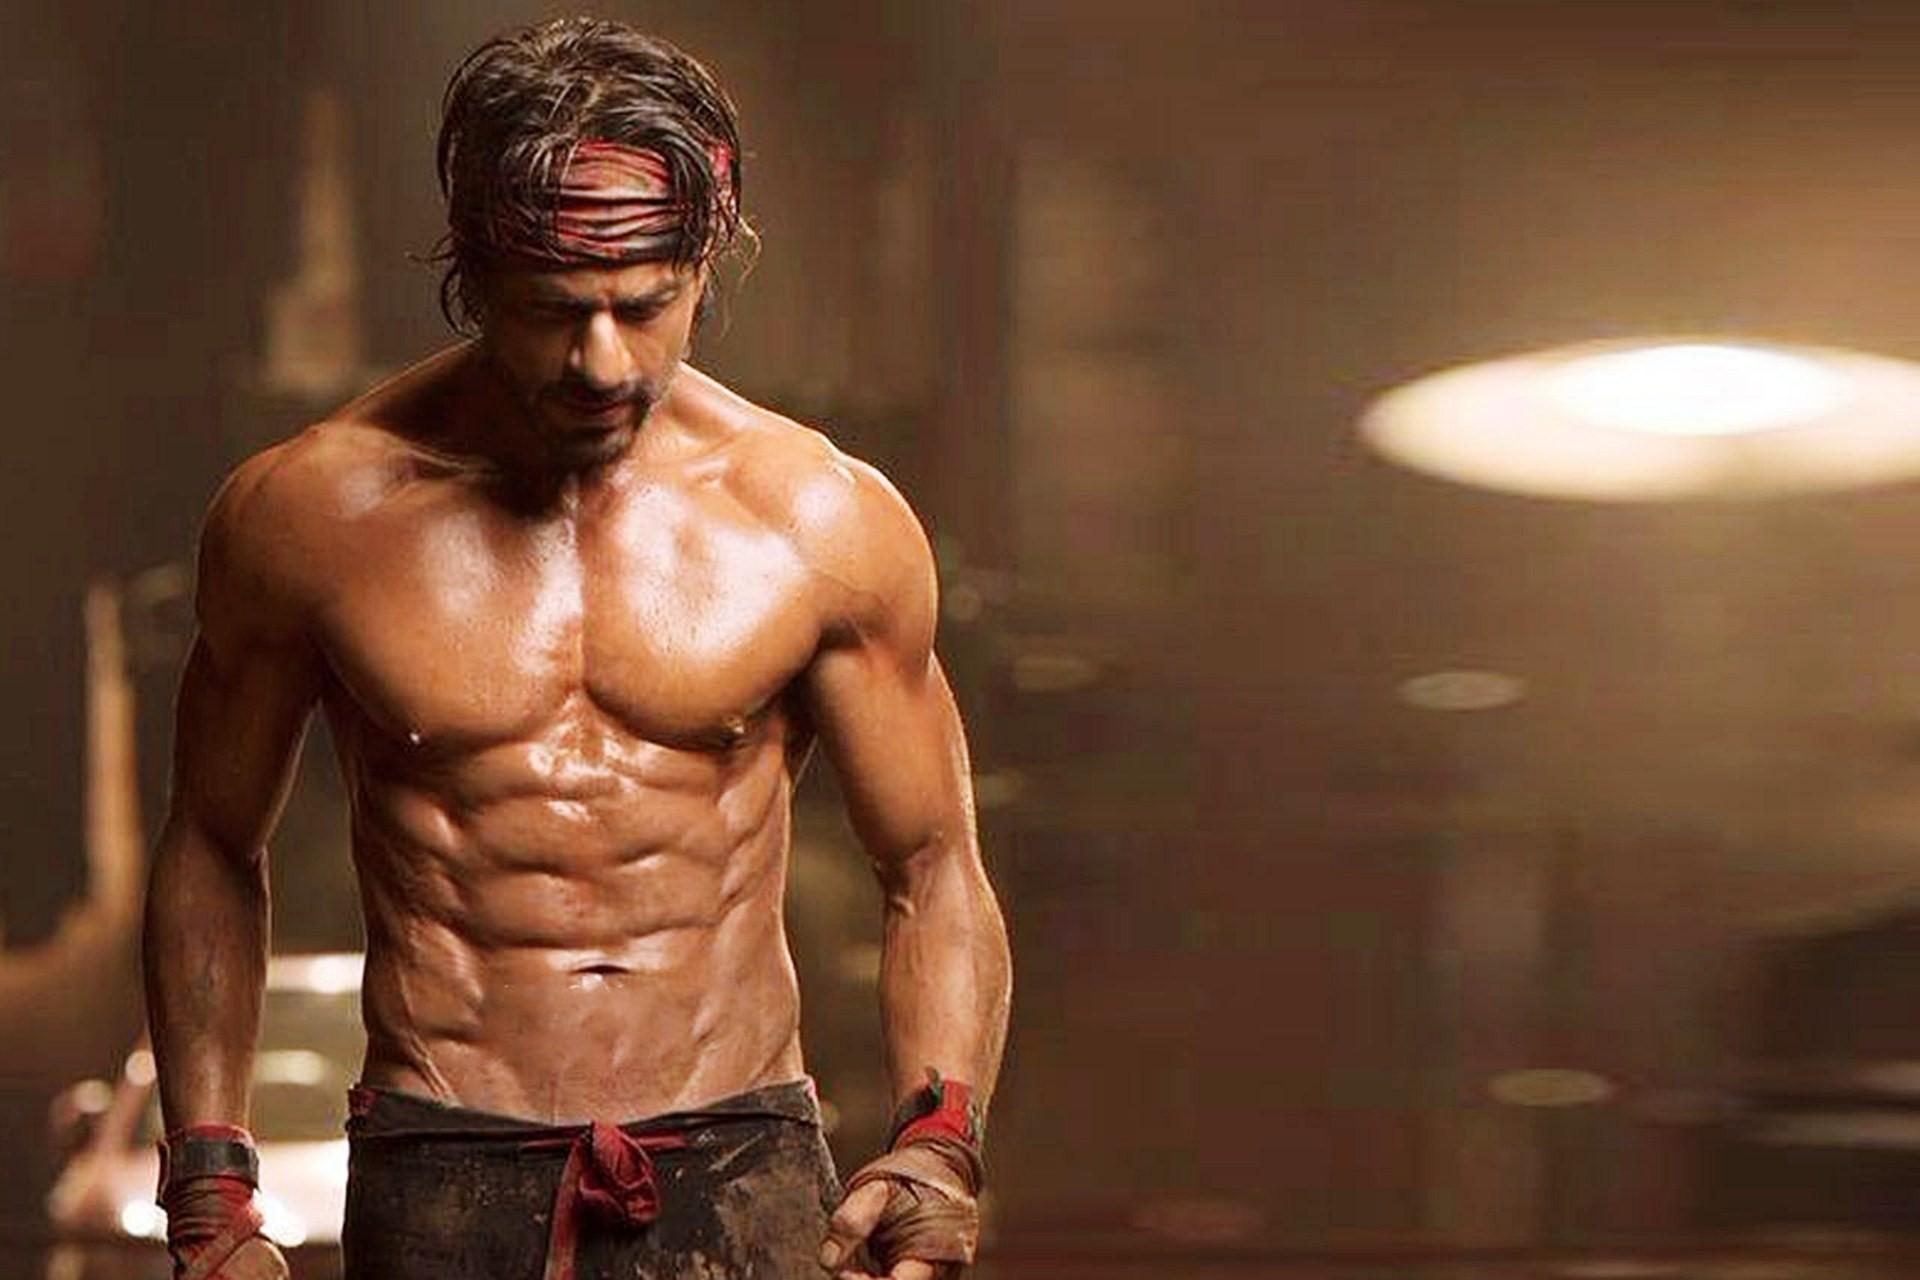 Famous Actor Shahrukh Khan 6 Pack Body in Happy New Year